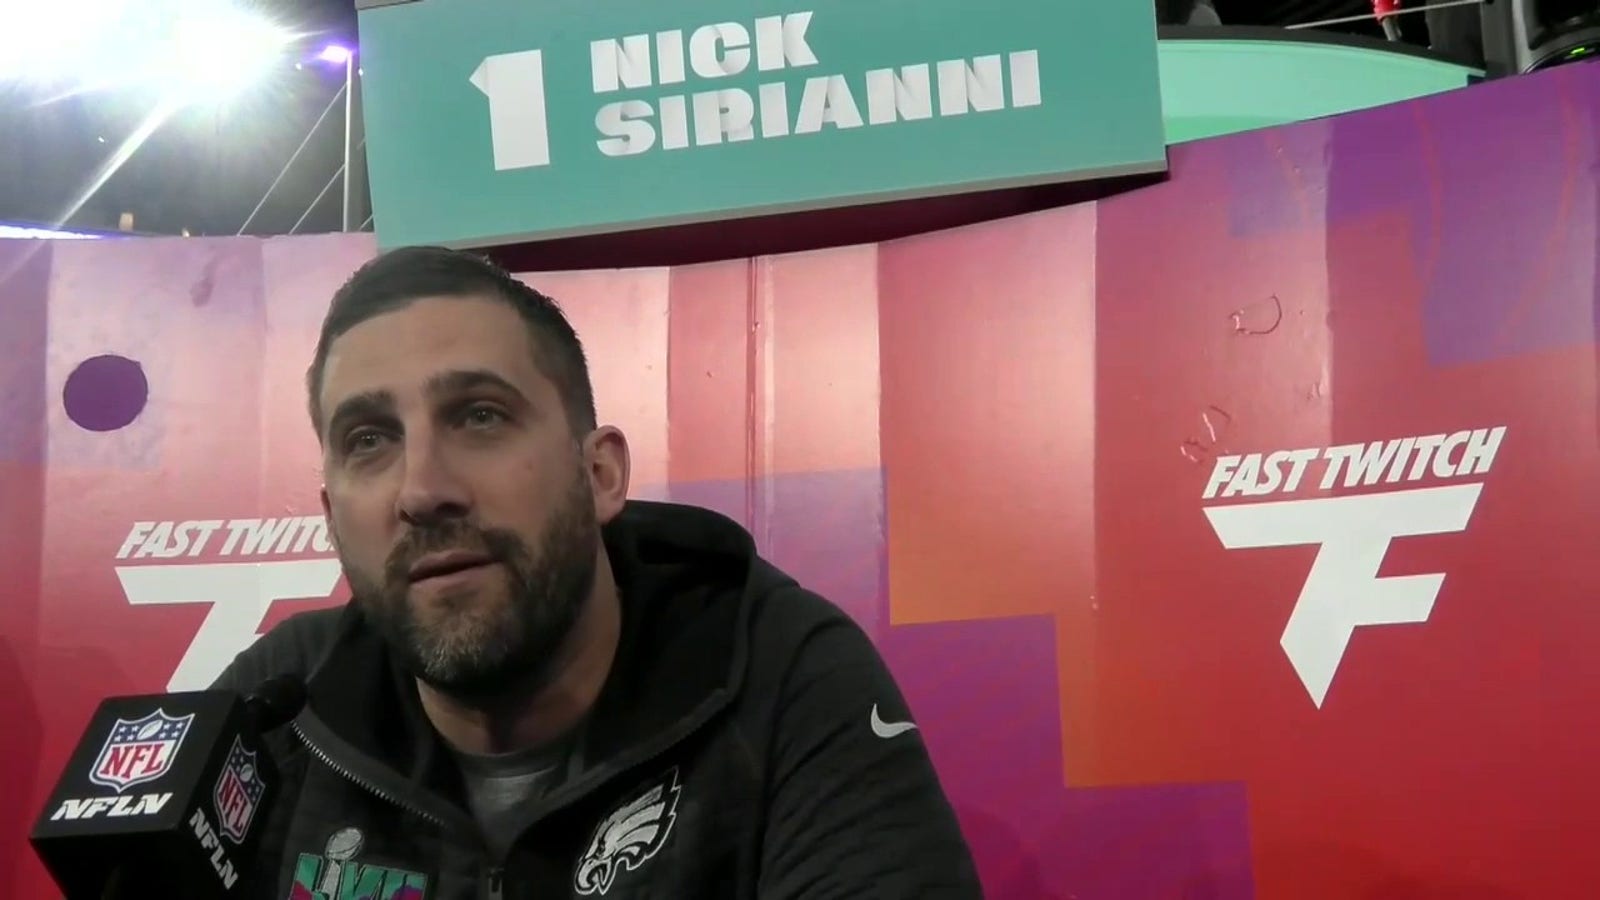 Eagles' HC Nick Sirianni on if the Super Bowl is a must-win game